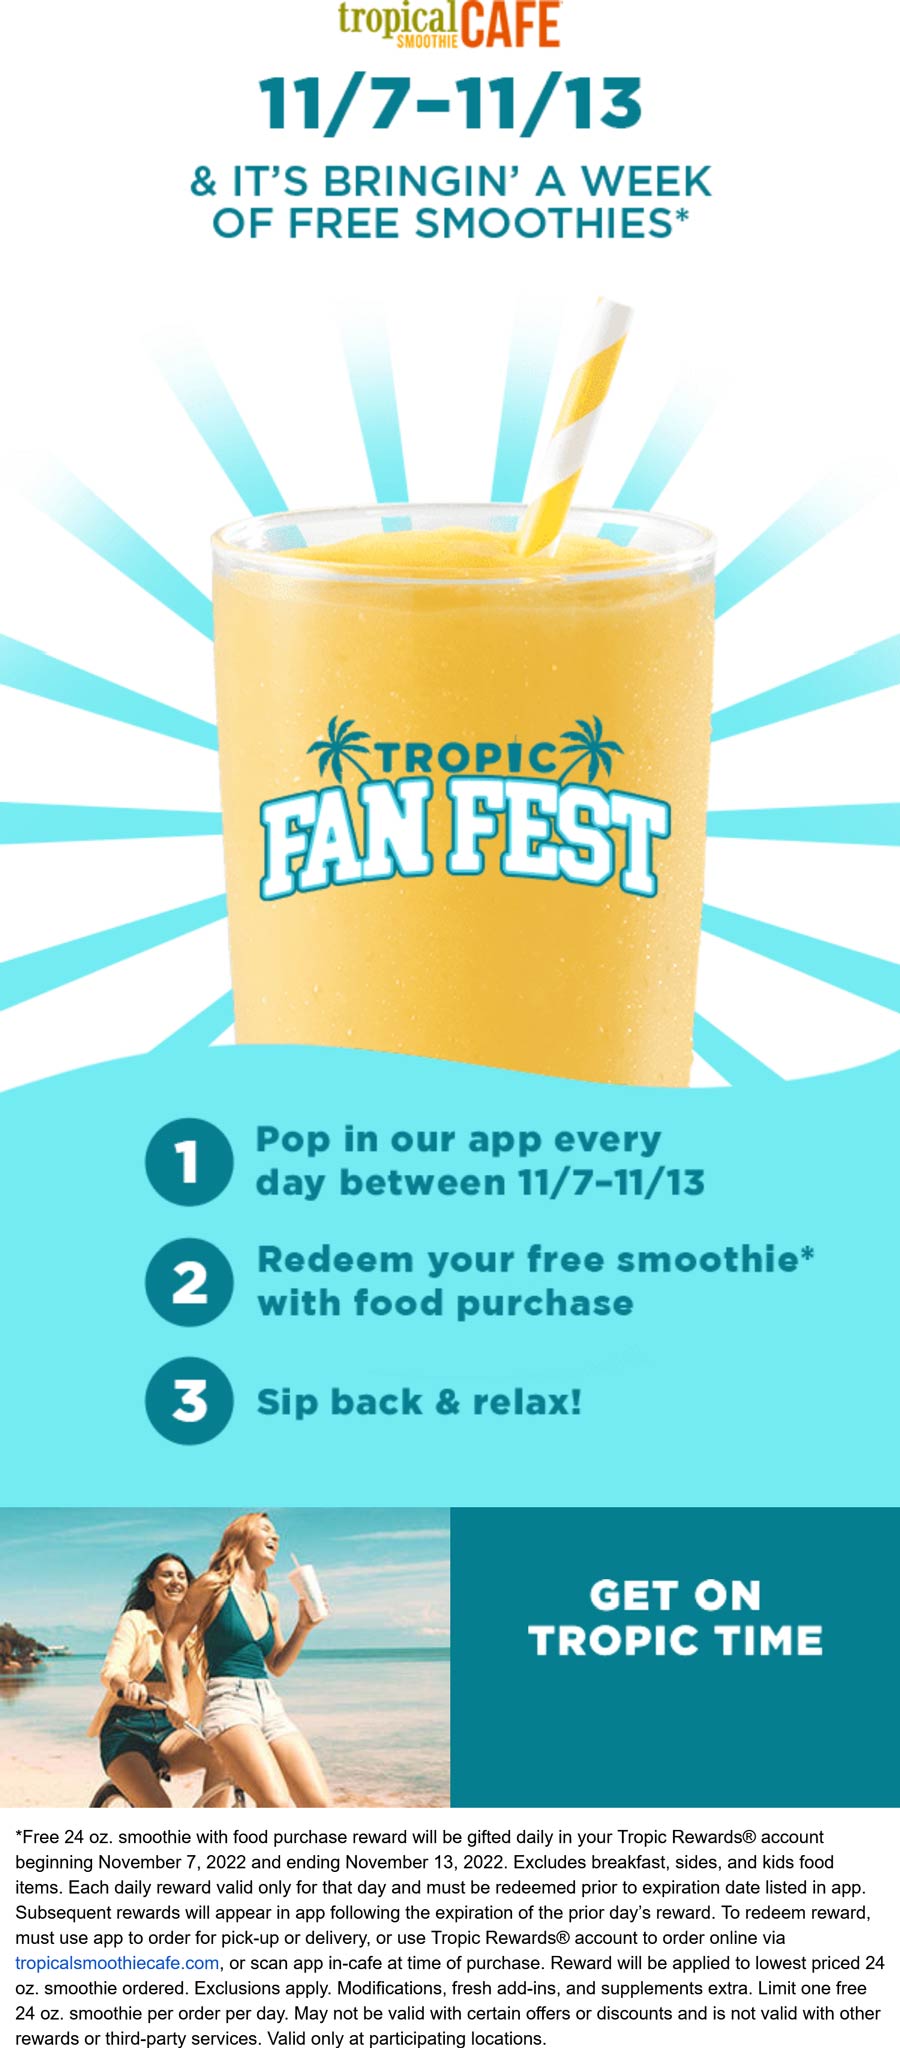 Tropical Smoothie Cafe restaurants Coupon  Free smoothie with food purchase daily at Tropical Smoothie Cafe #tropicalsmoothiecafe 